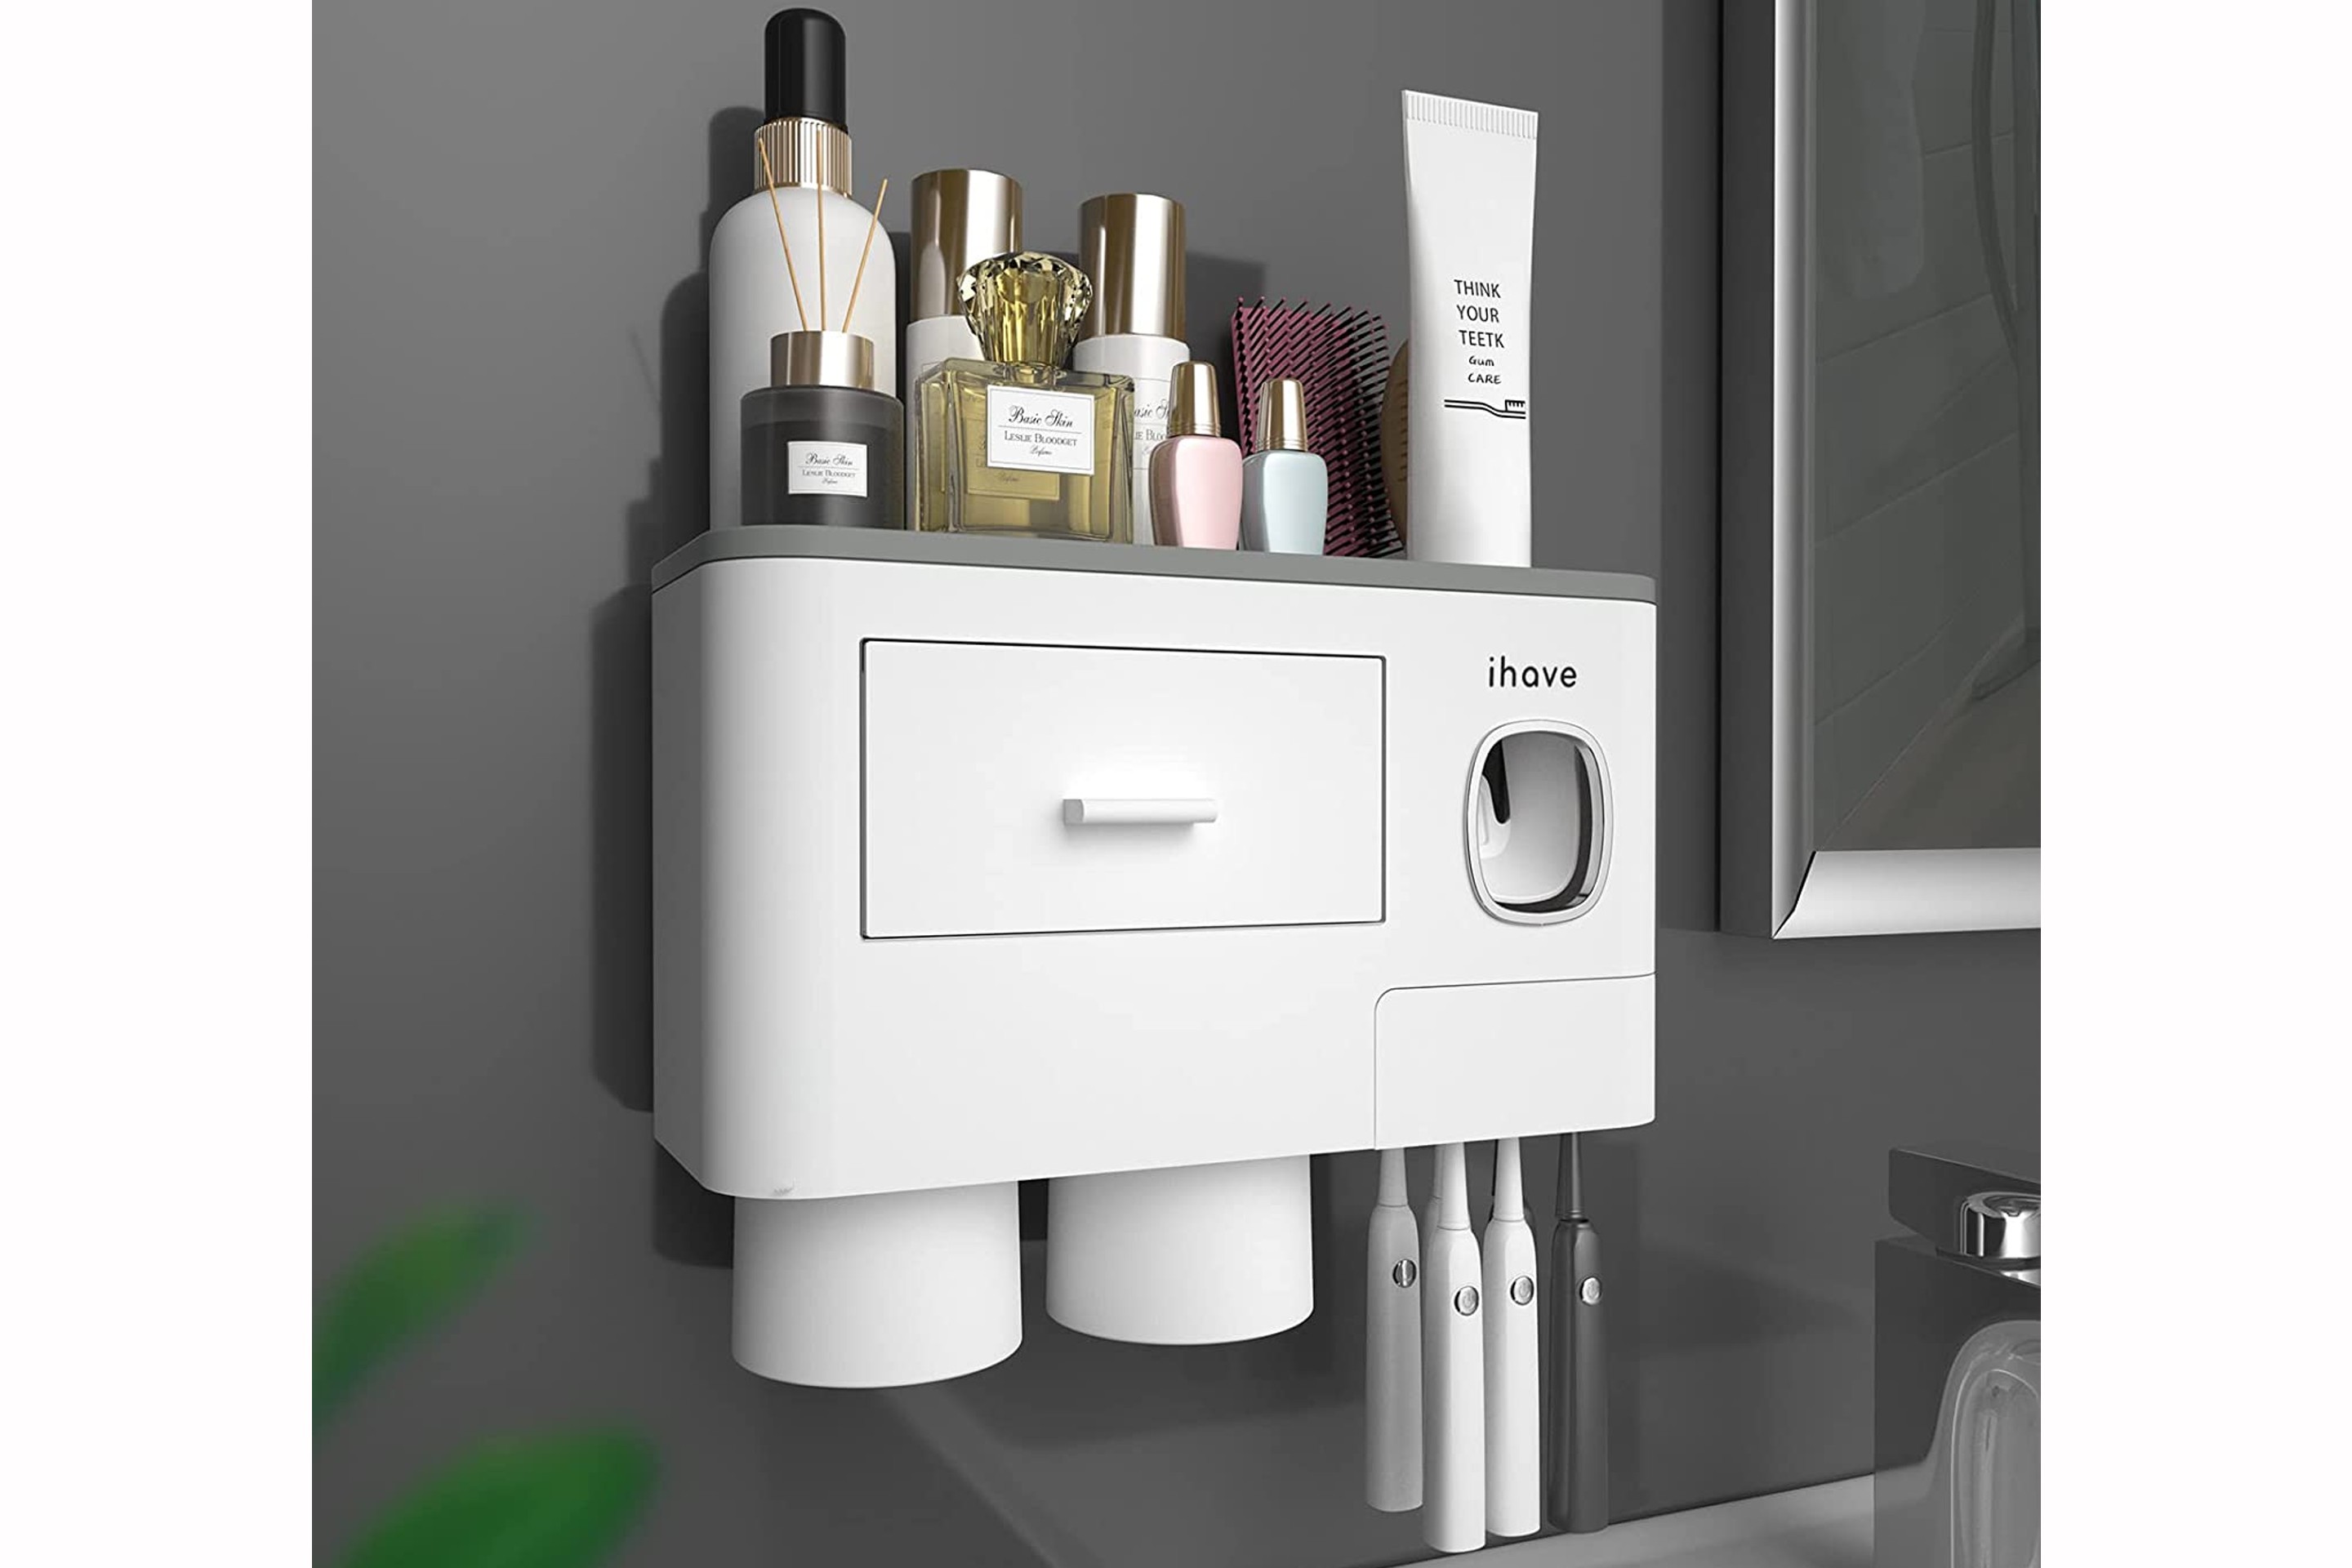 iHave Toothbrush Holder with Toothpaste Dispenser